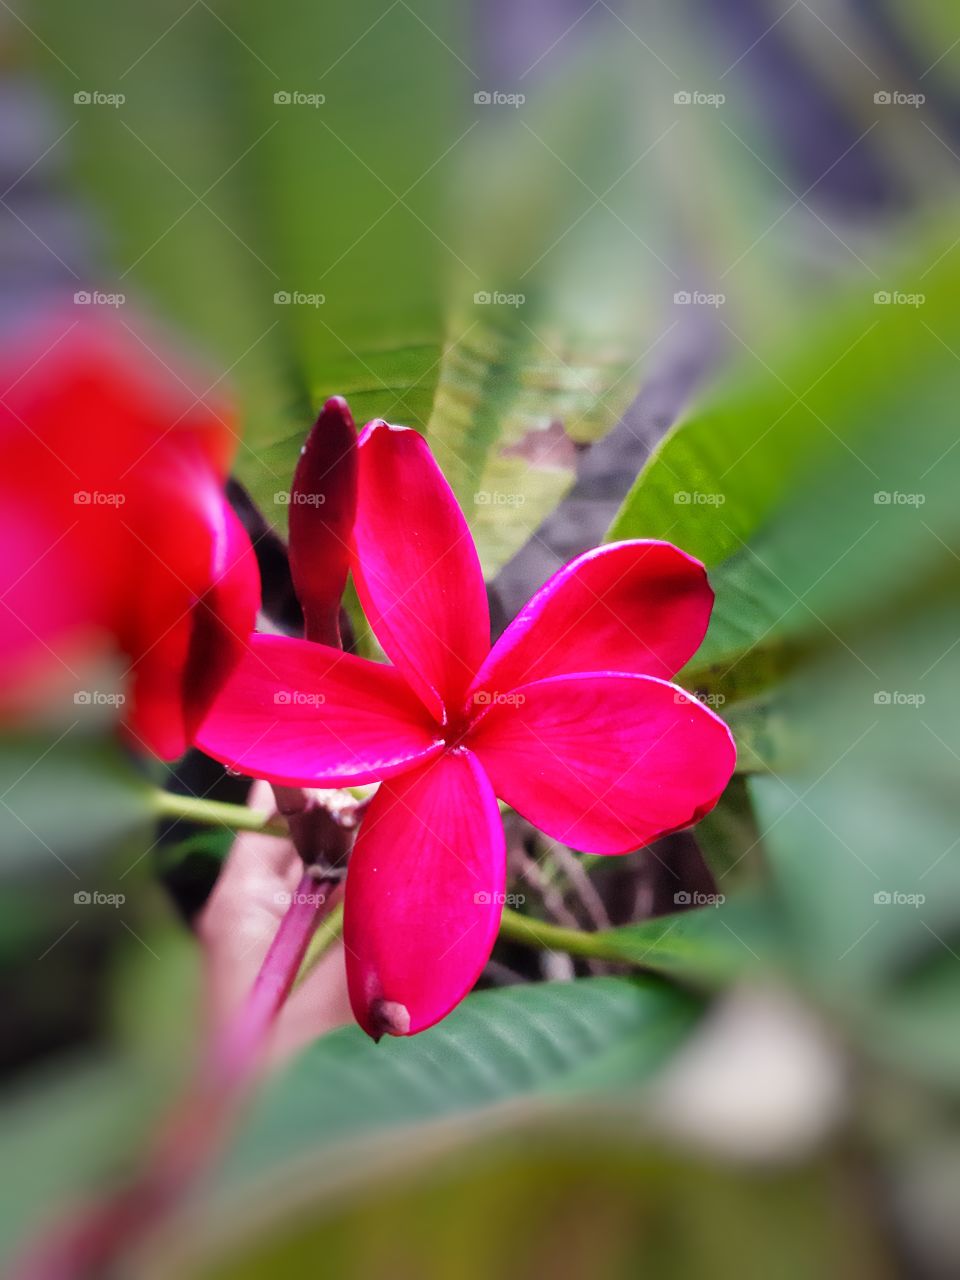 A focused background photo of bright red flower